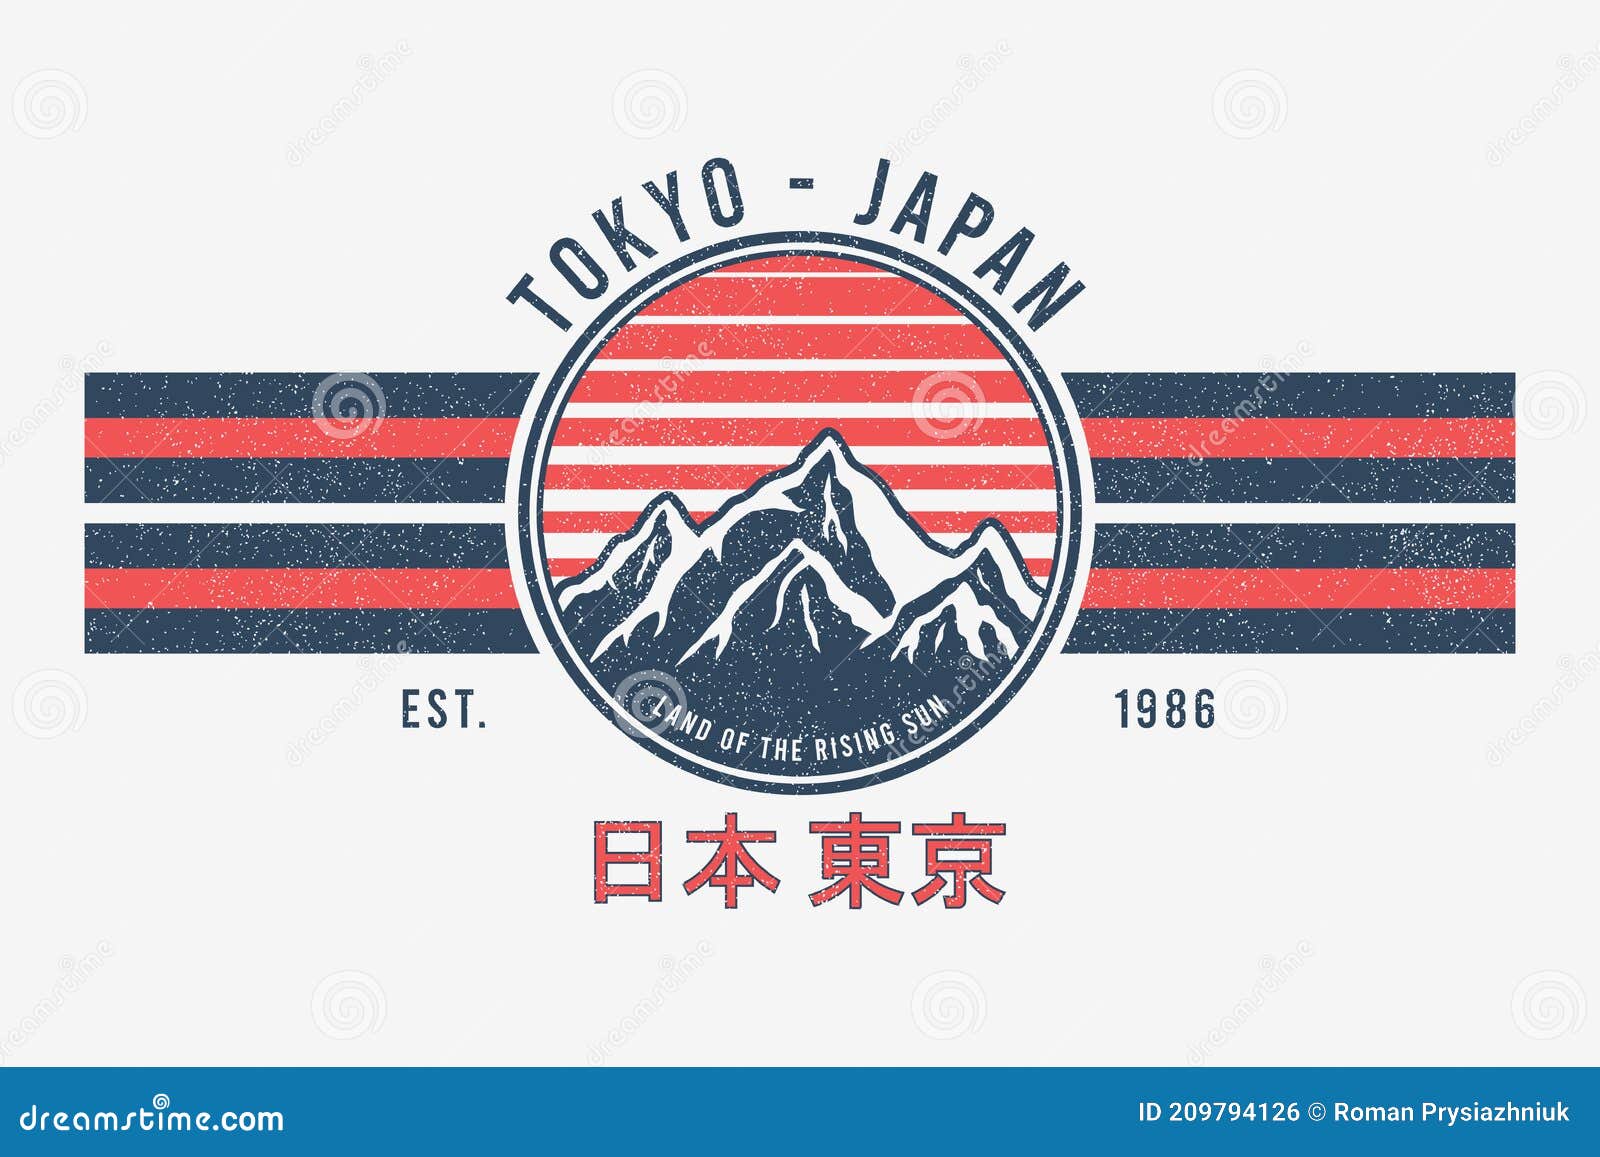 tokyo, japan t-shirt  with mountains and sun. tee shirt graphics print with stripes, grunge and inscription in japanese